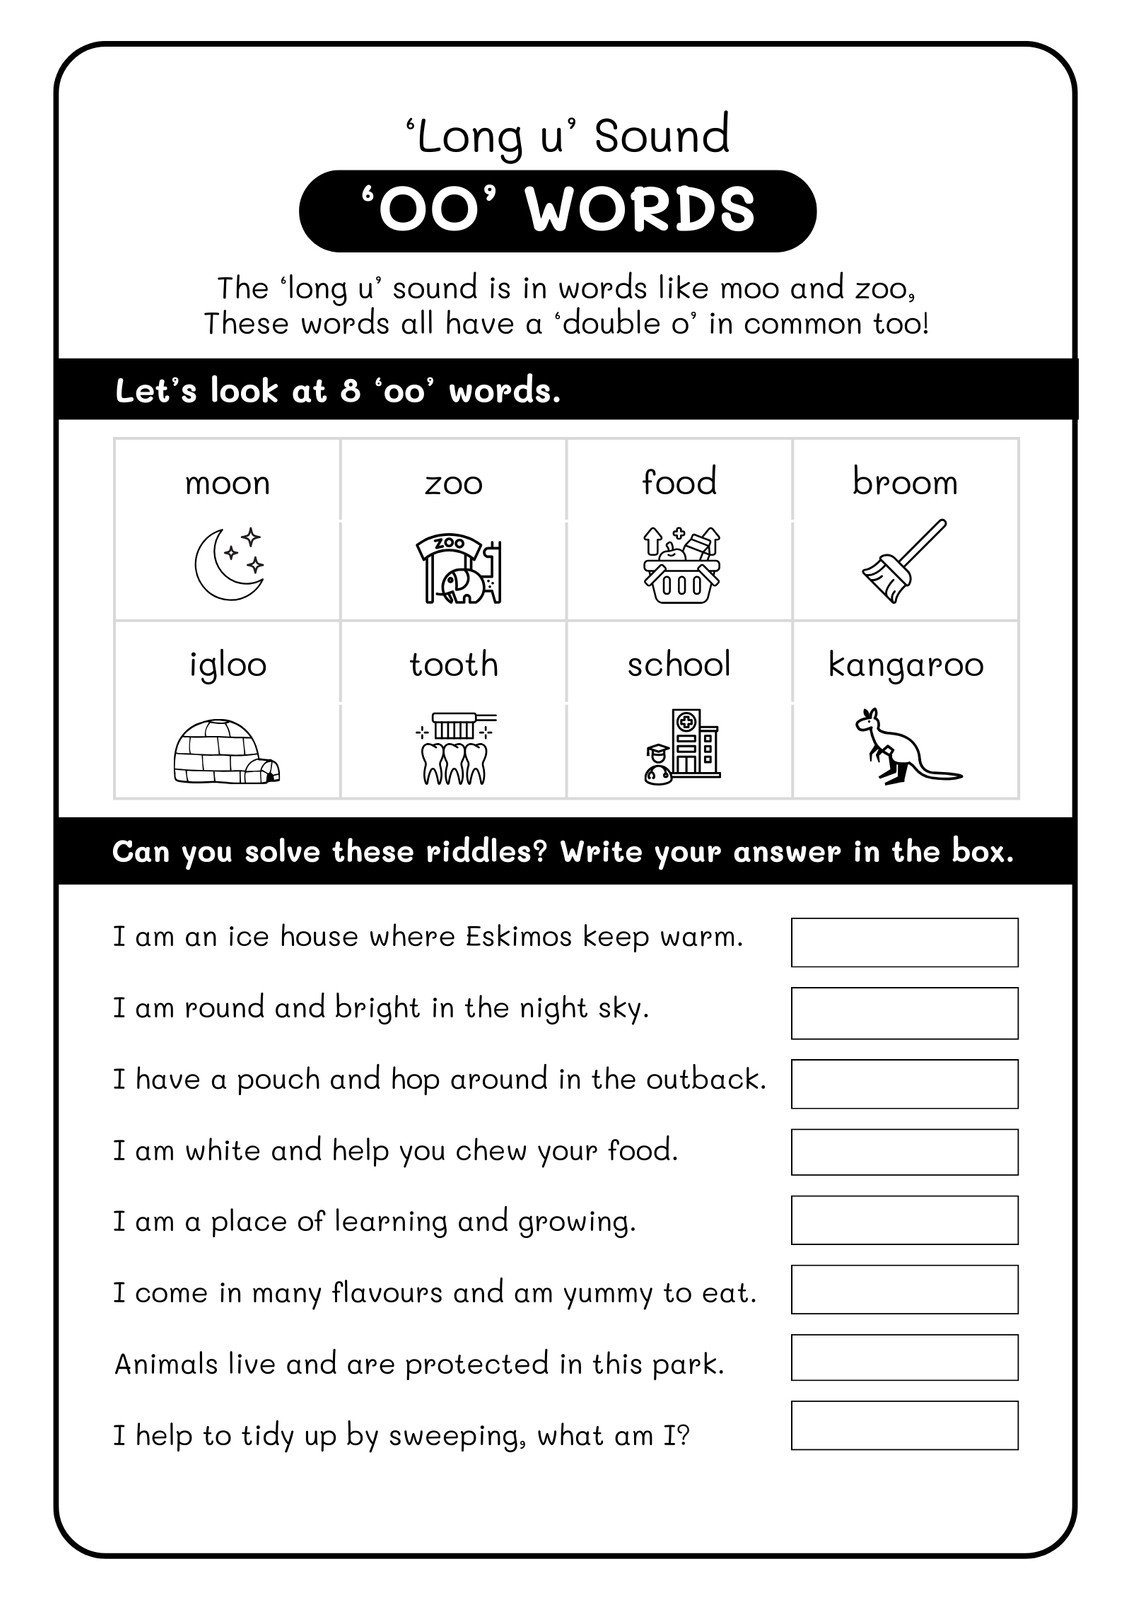 Summer Clothes & Accessories Vocabulary Worksheet - Templates by Canva   Speaking activities english, English language teaching, English teaching  resources